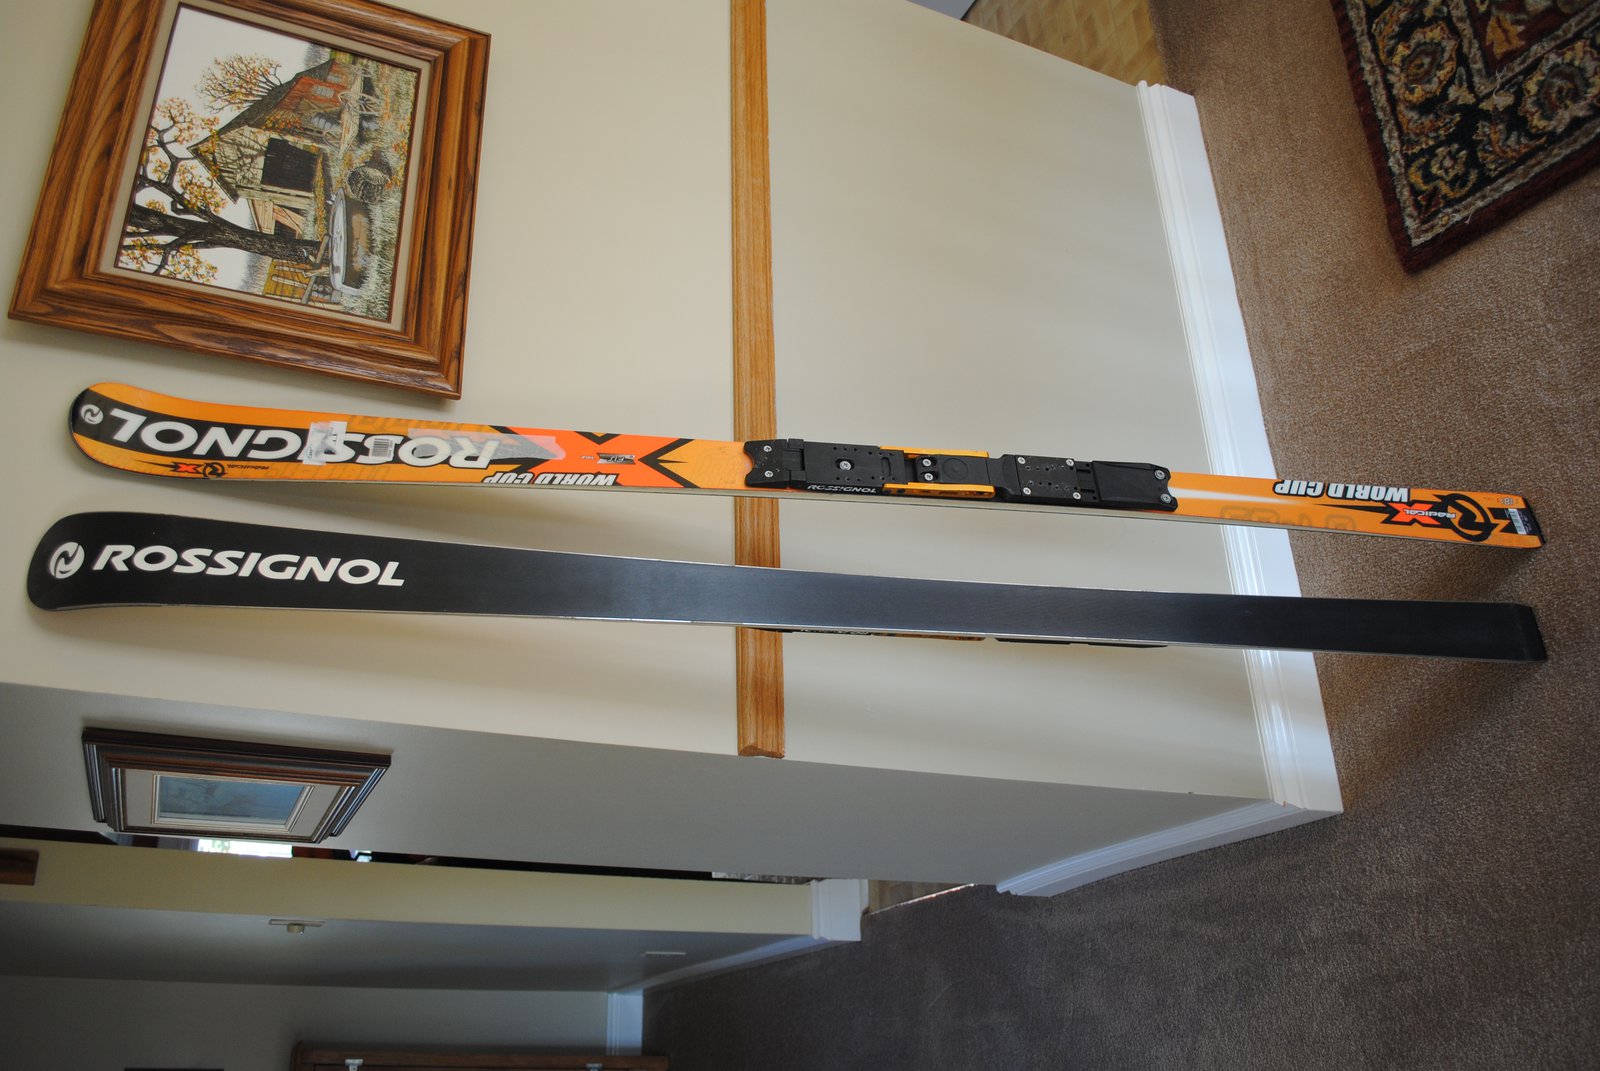 Gs skis for sale